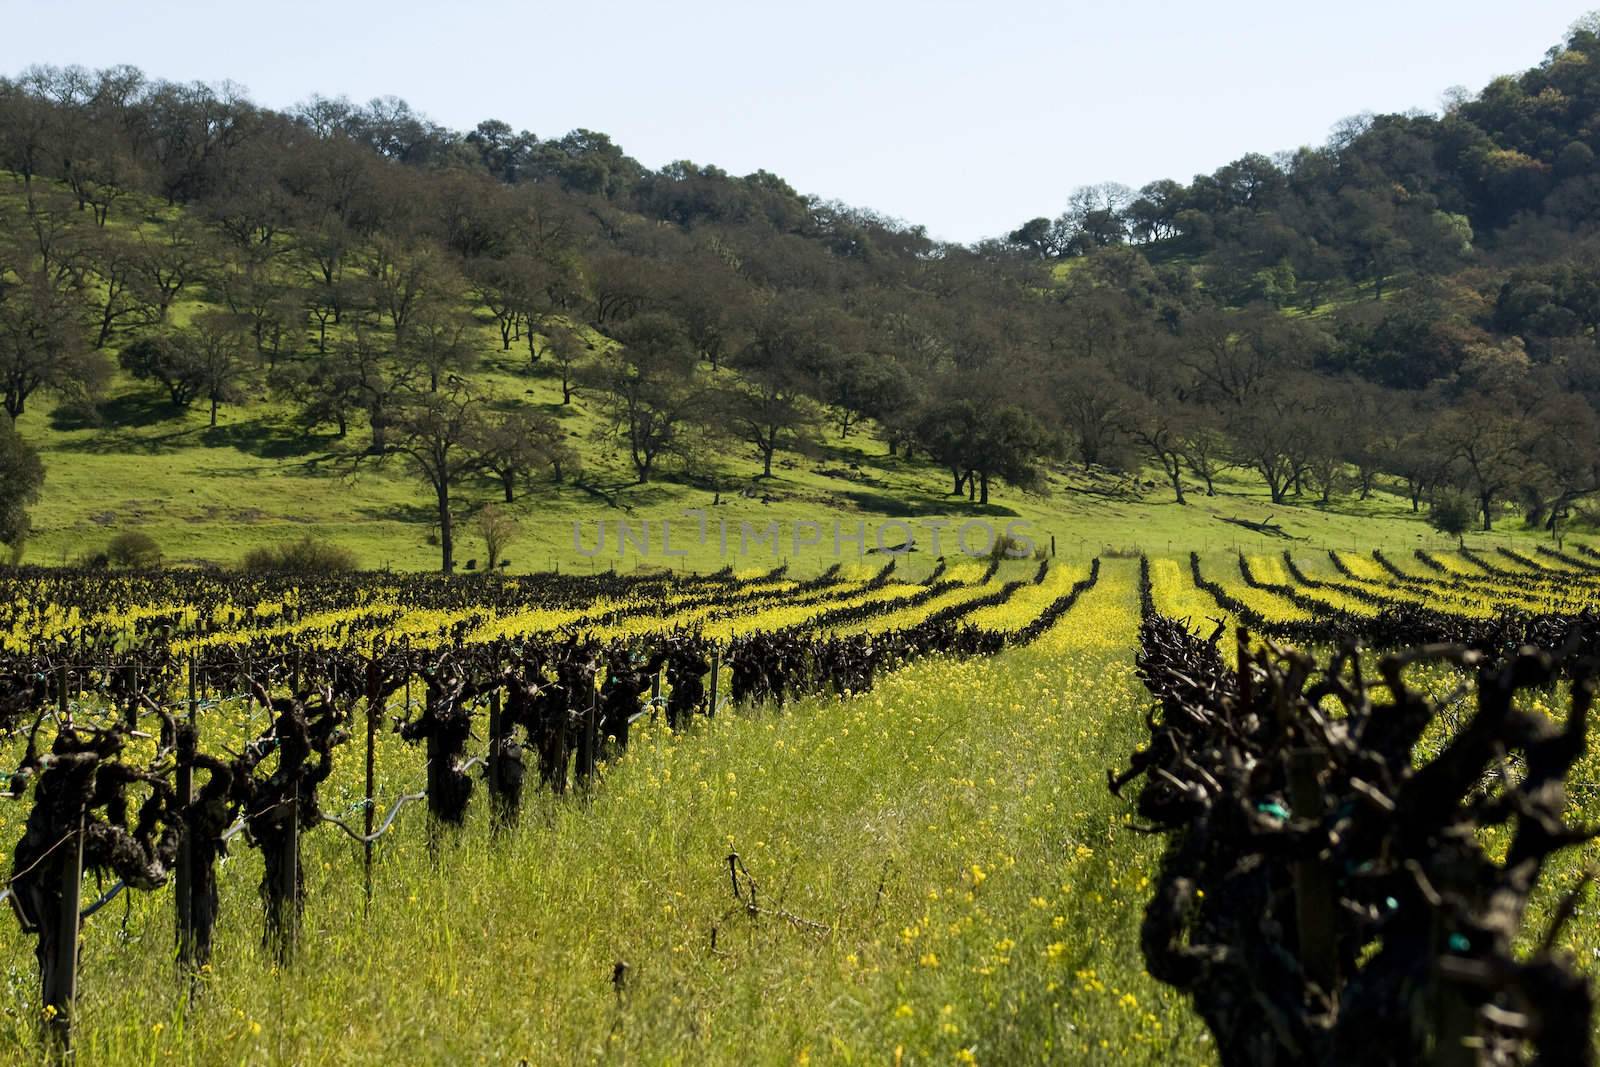 Bright yellow mustard flowers in old vine vineyard with hills in background